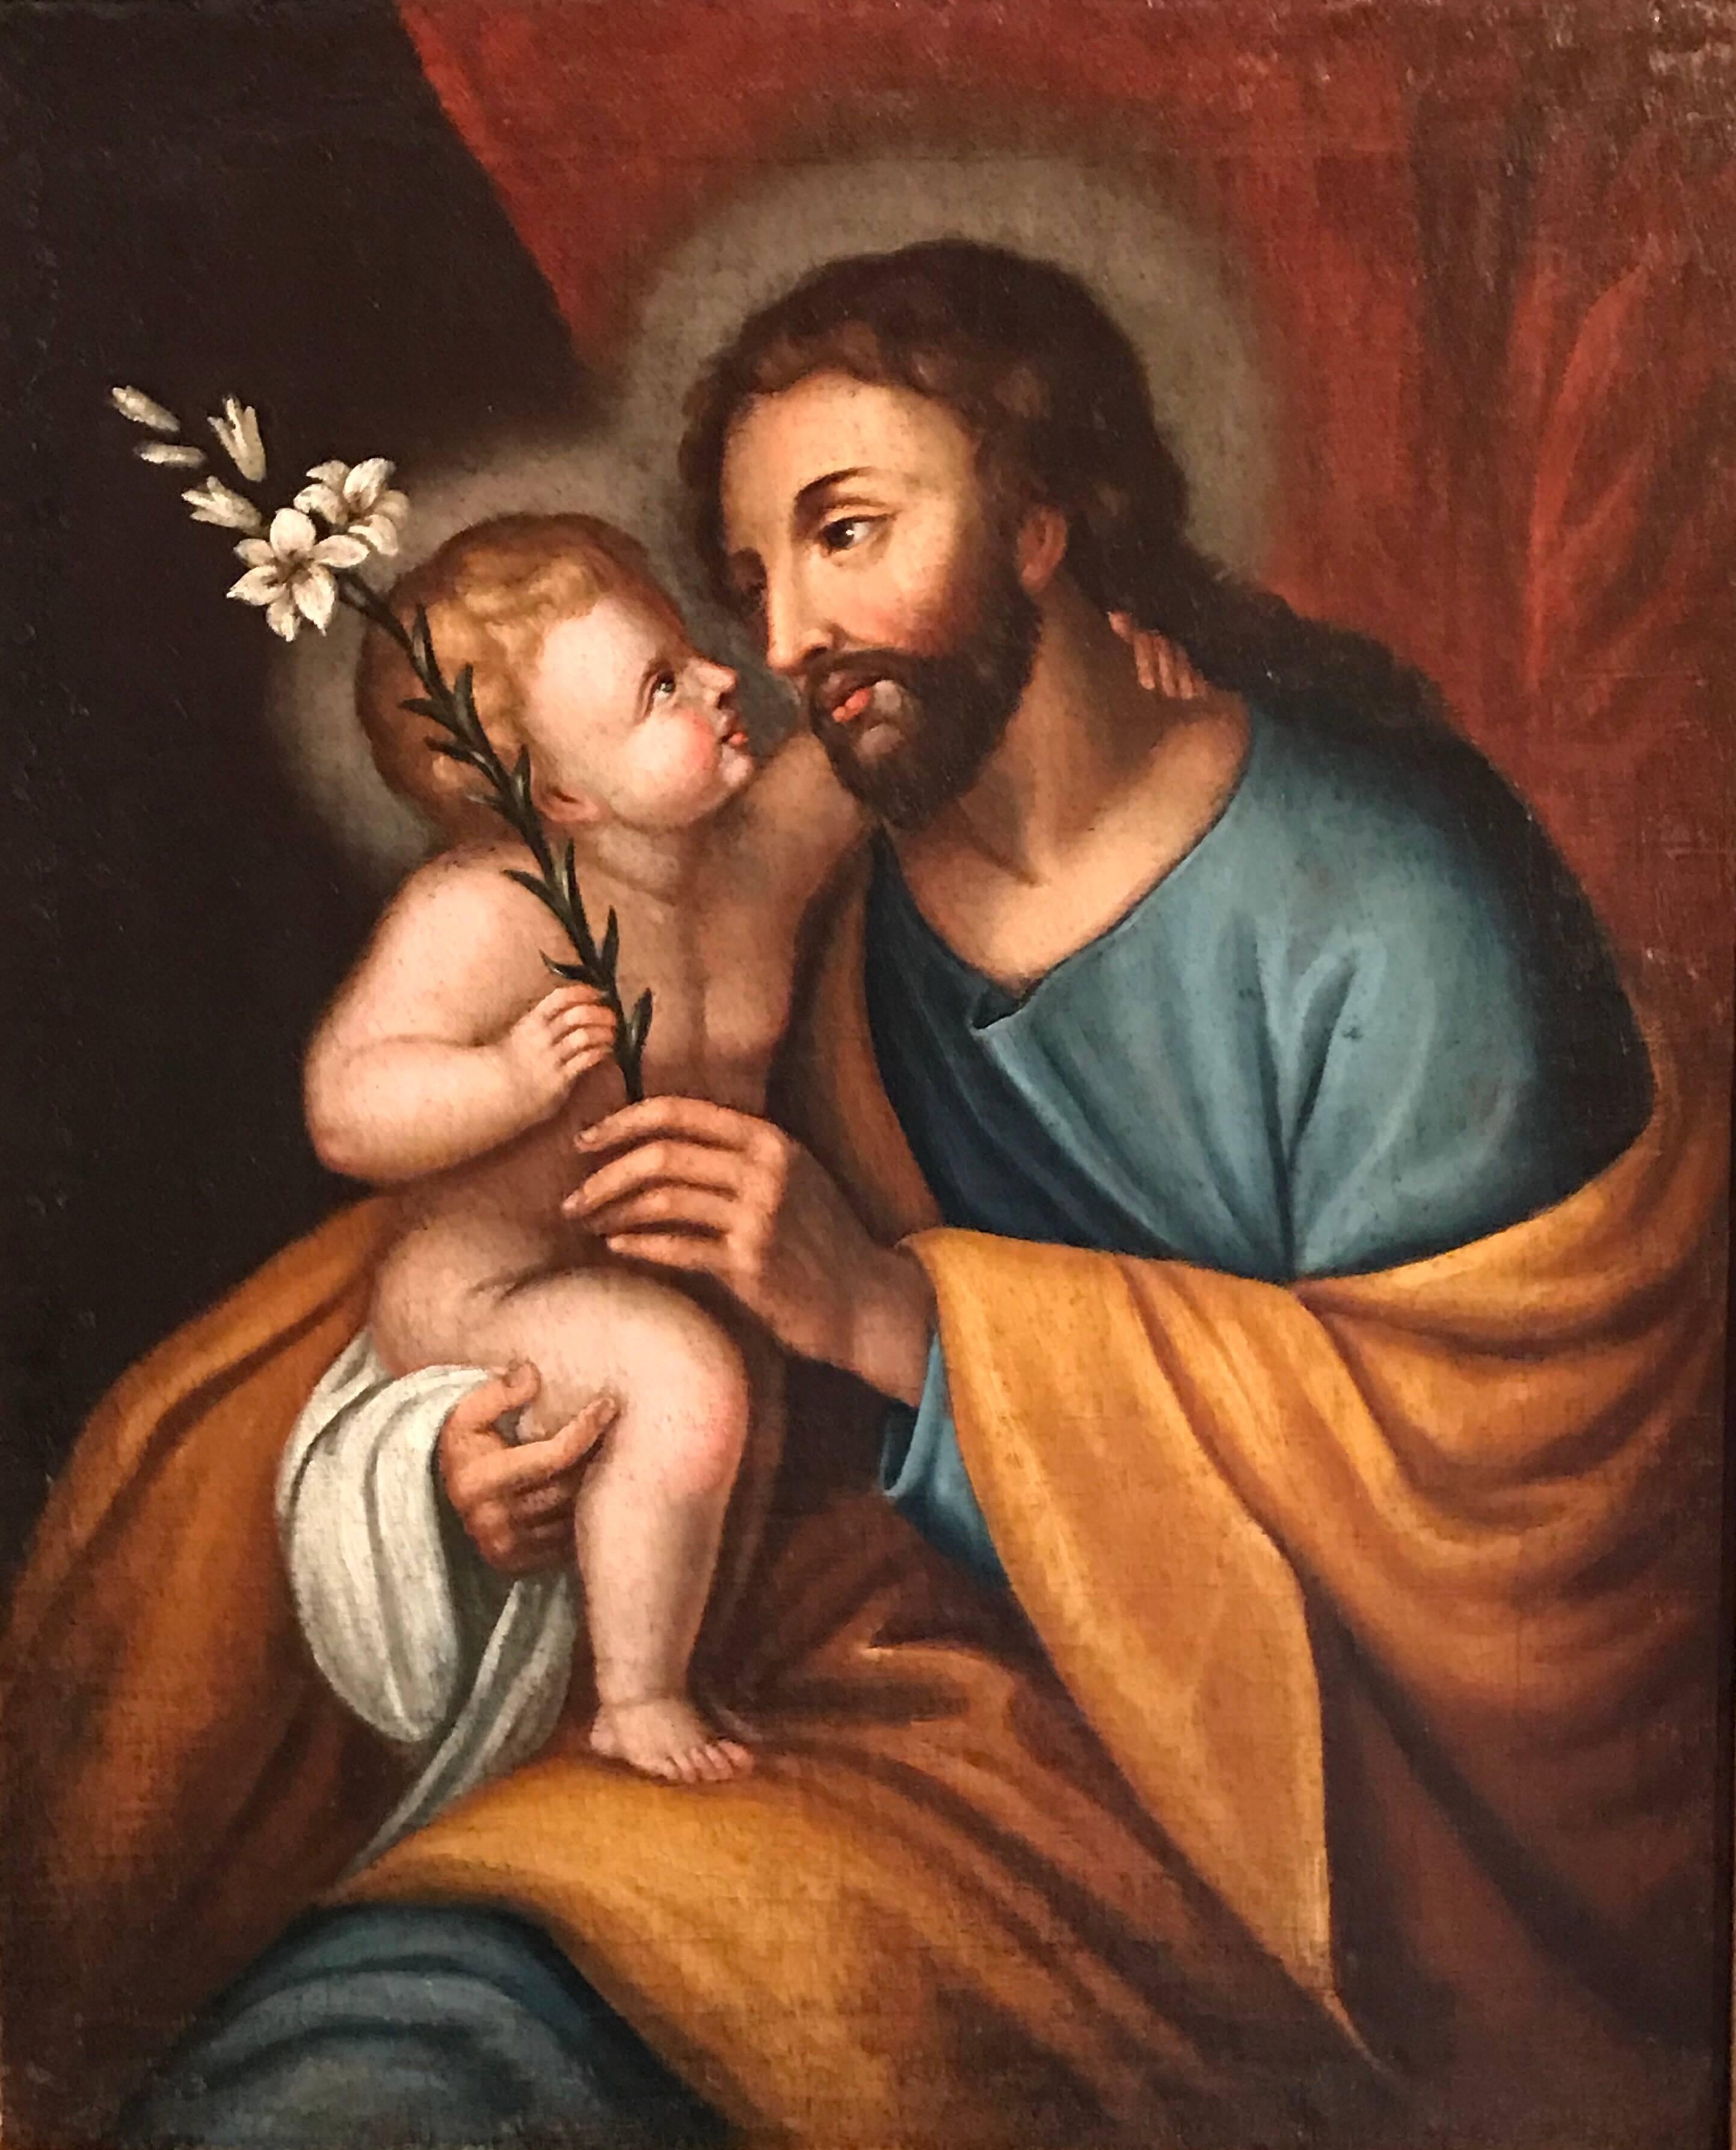 Unknown Portrait Painting - Joseph & Infant Christ Child, 17th century Old Master oil painting